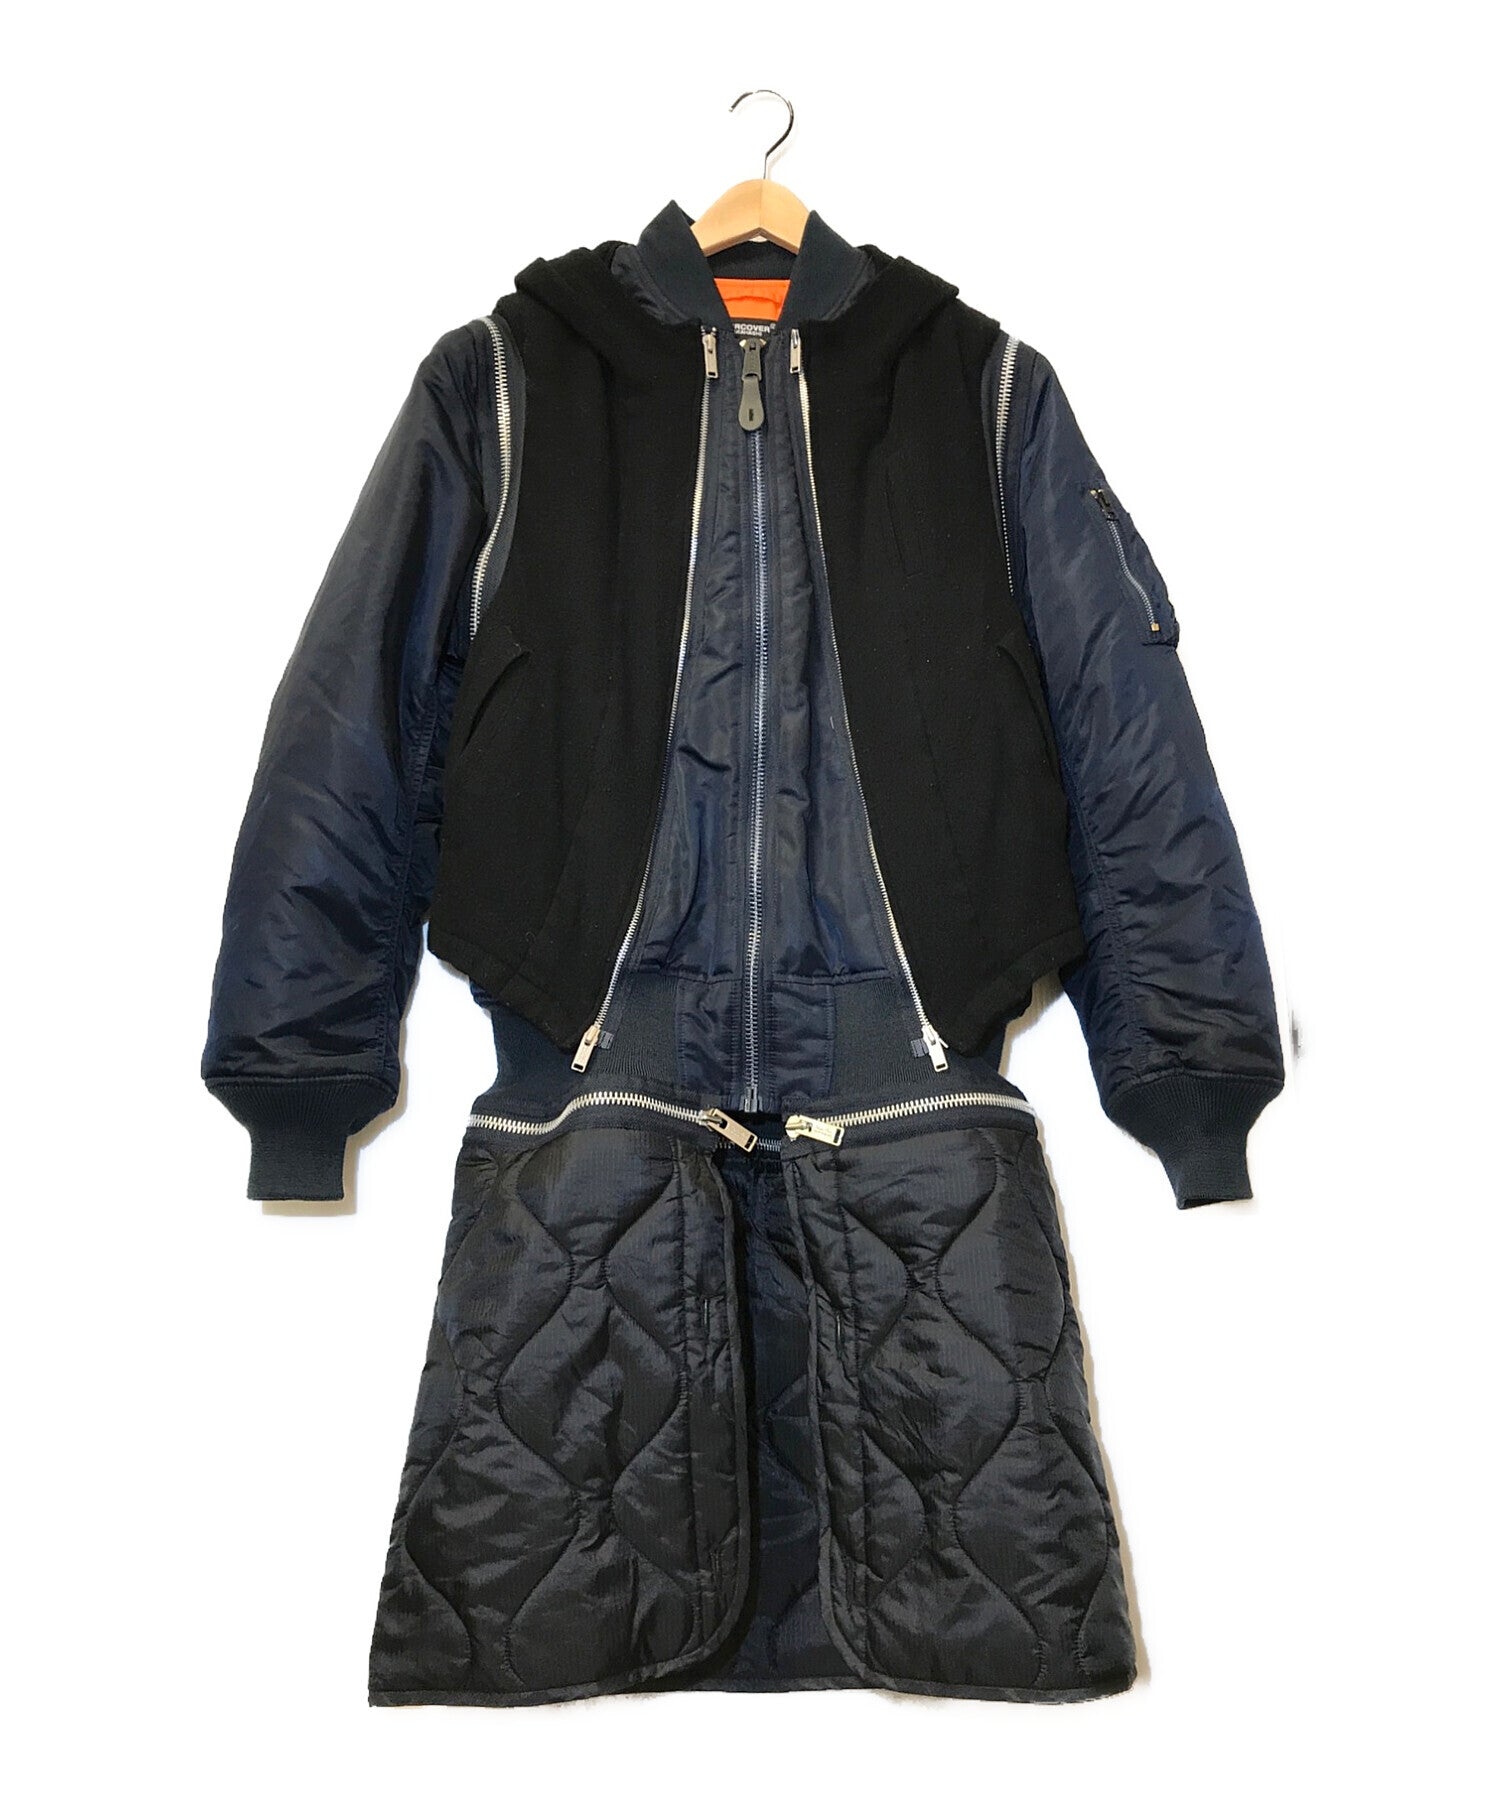 Louis Vuitton Leather Outer Shell Coats, Jackets & Vests for Men